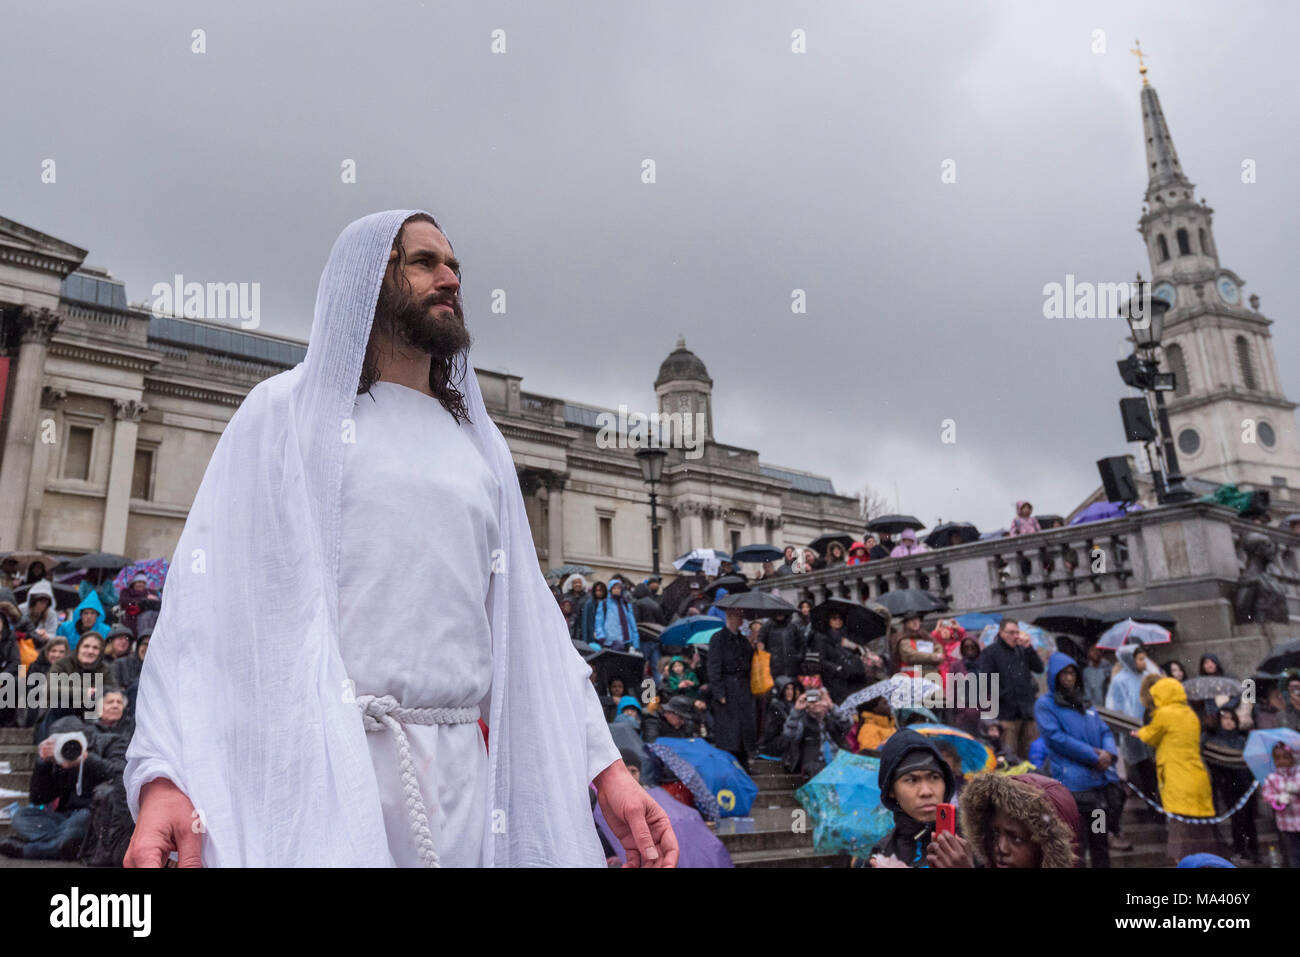 London Uk 30 March 18 Jesus Played By James Burke Dunsmore Is Resurrected After His Crucifixion